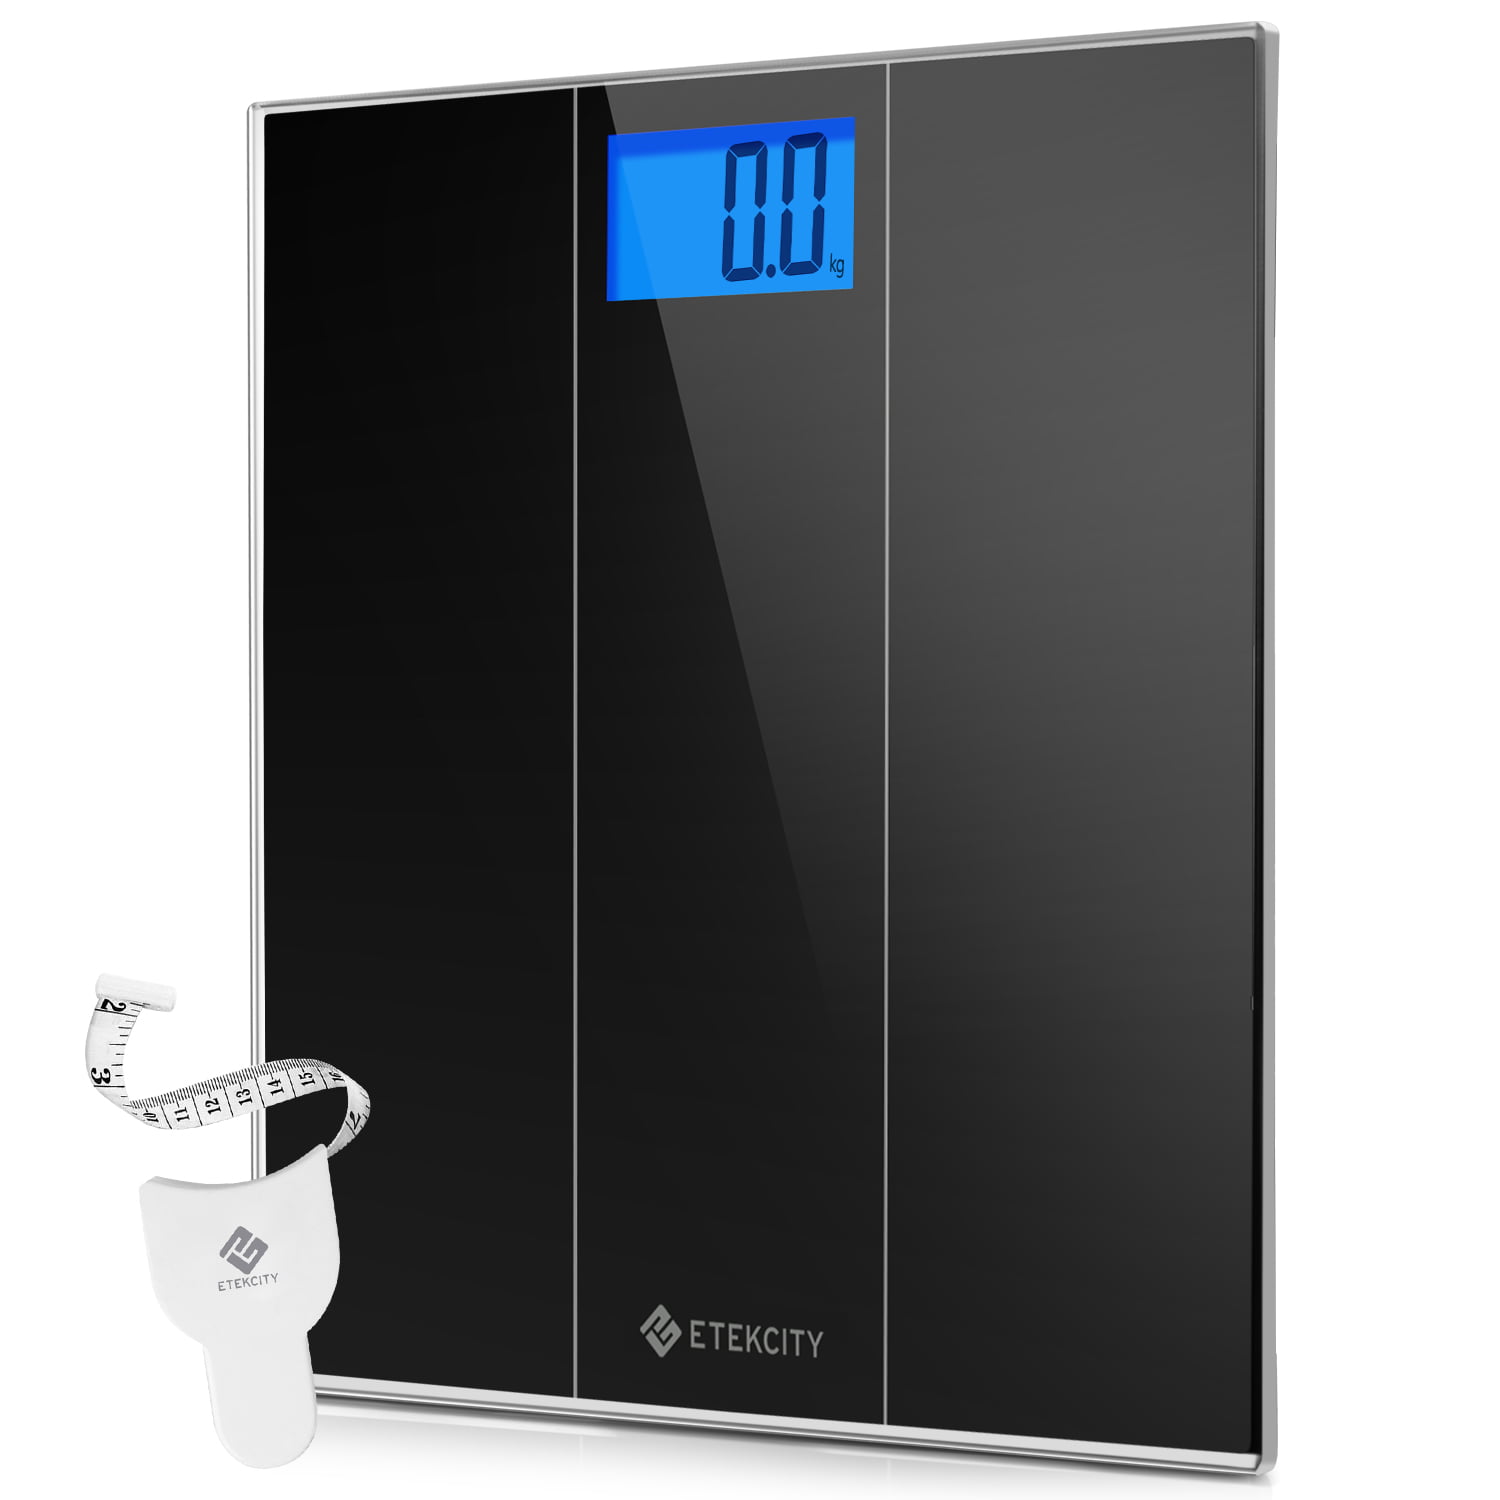 Tempered Gla Etekcity Digital Body Weight Bathroom Scale With Body Tape Measure 